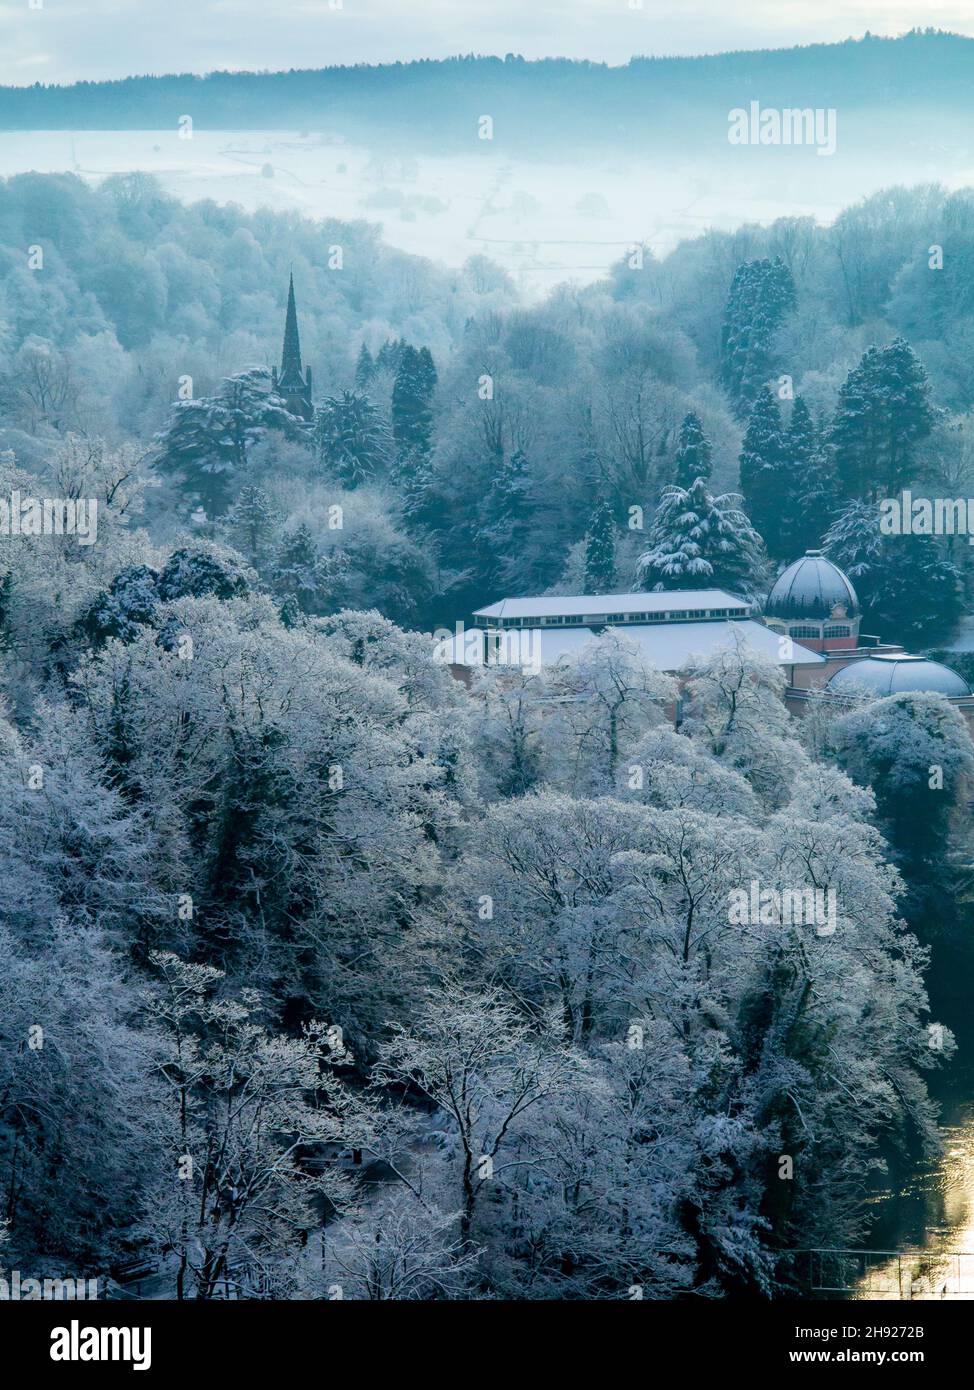 Snow covered landscape with trees at Matlock Bath in the Derbyshire Peak District England UK with Cromford Moor visible in the distance. Stock Photo